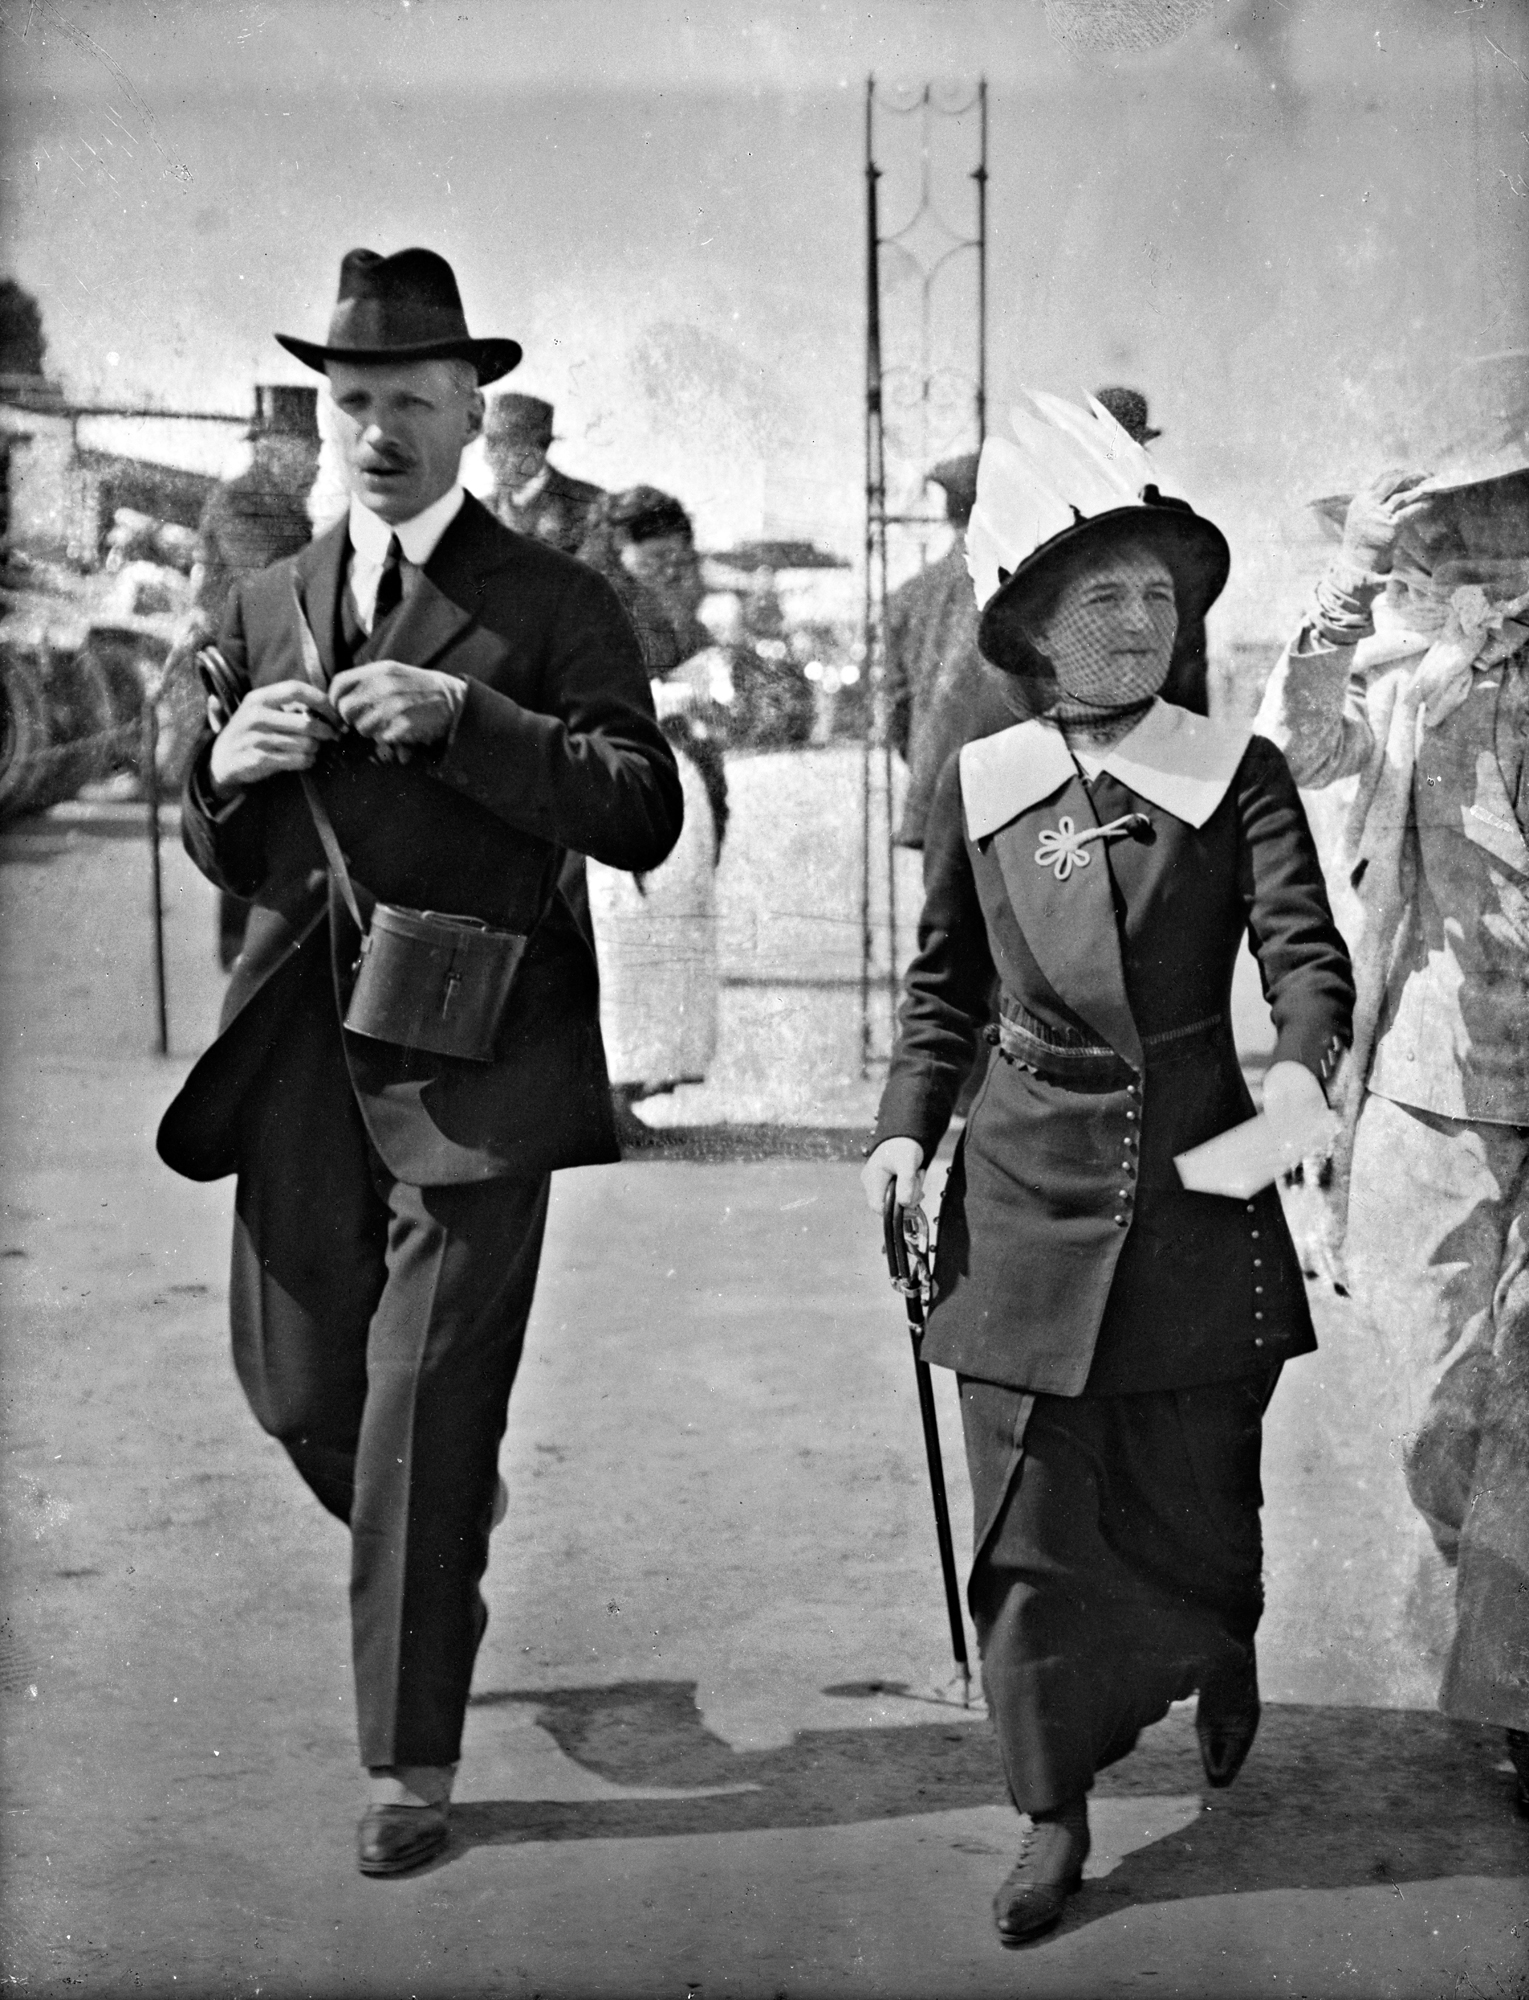 Spit, spot, spats, striding strongly!  Mr. and Mrs. Herbert Goff at the races!